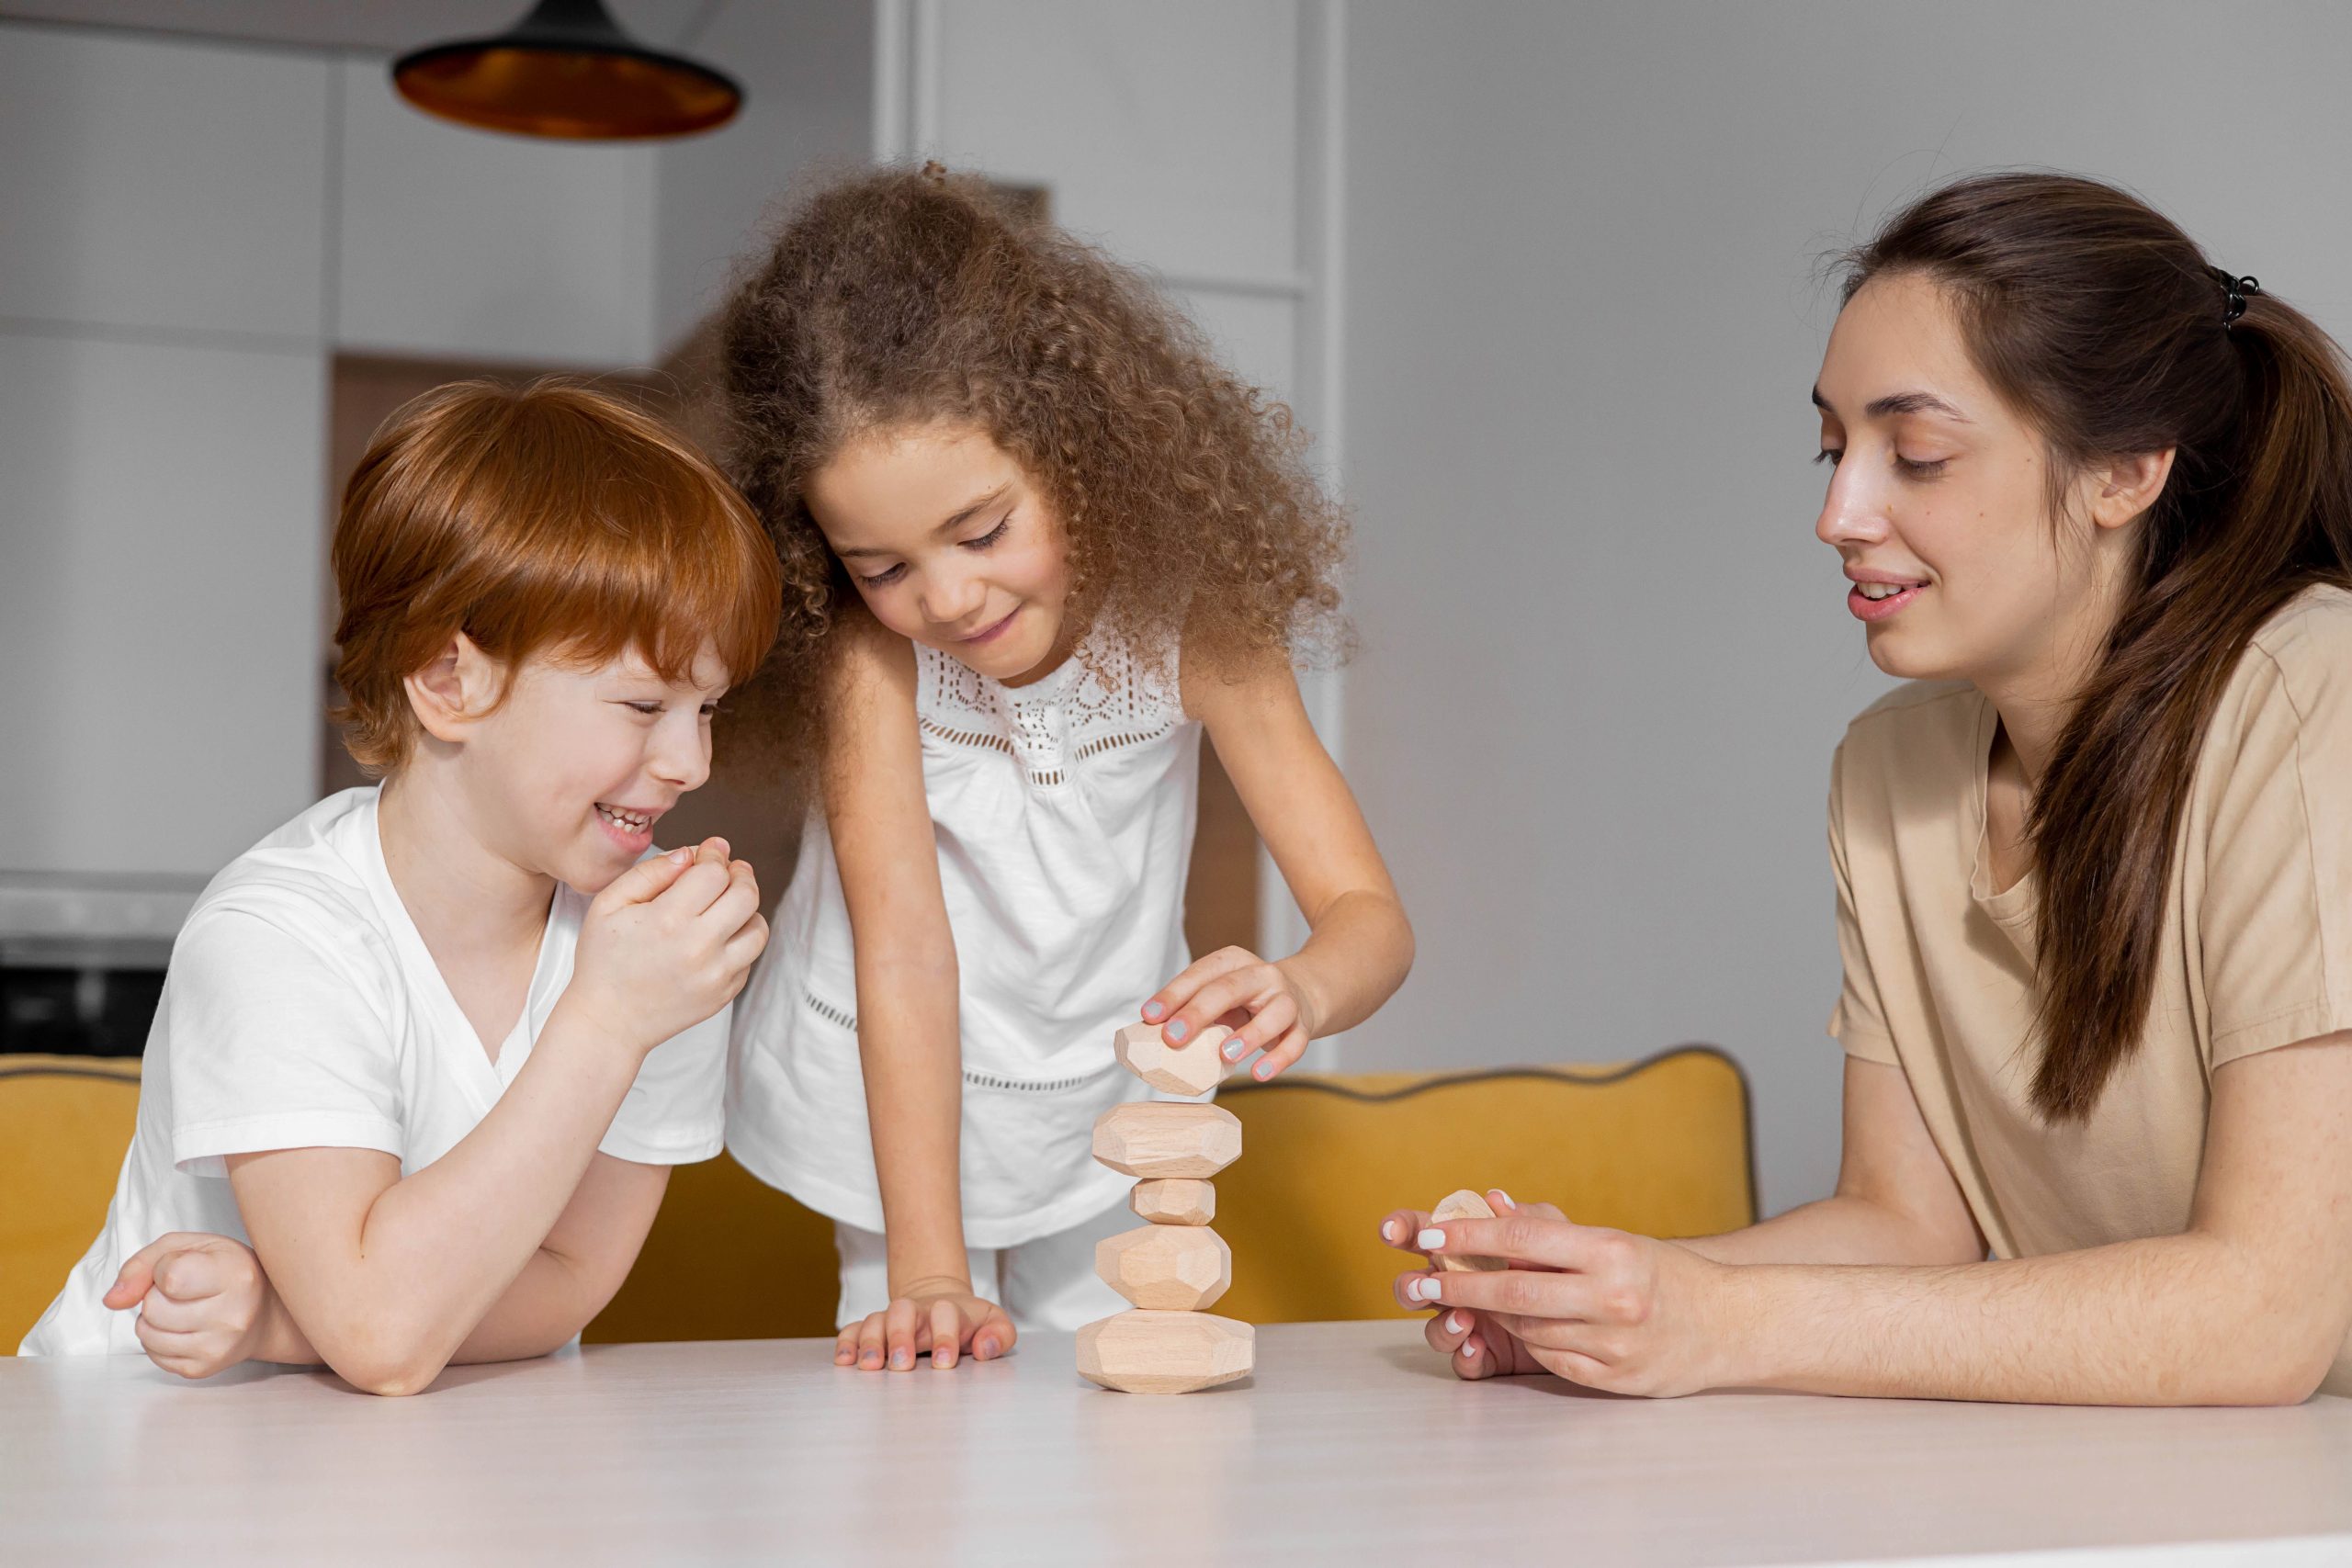 Two children and a young woman smiling and playing a stacking block game together. 